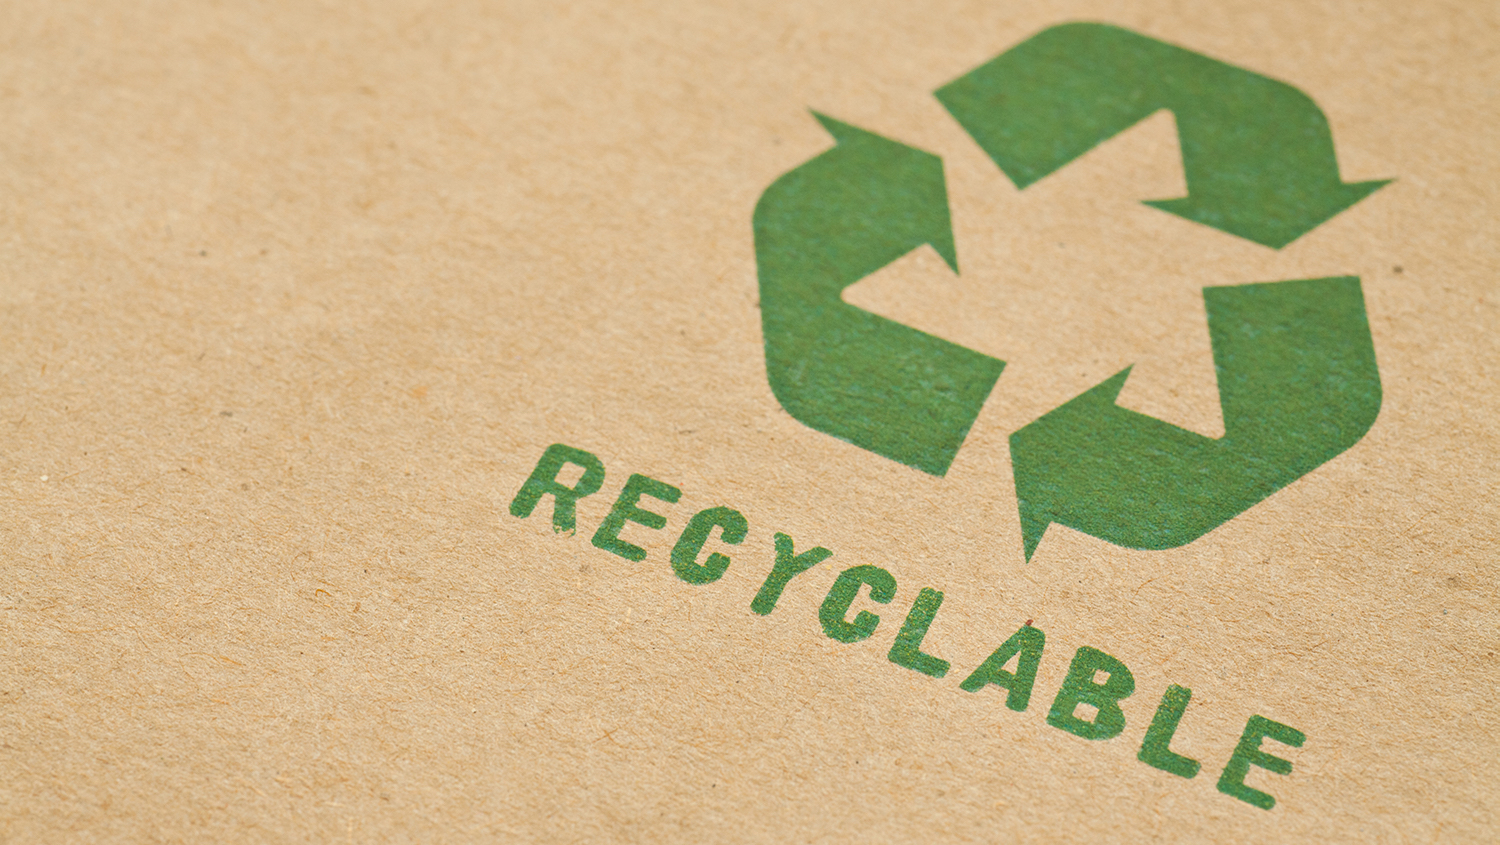 cardboard box - Recycling Technology Research - Forest Biomaterials at NC State University